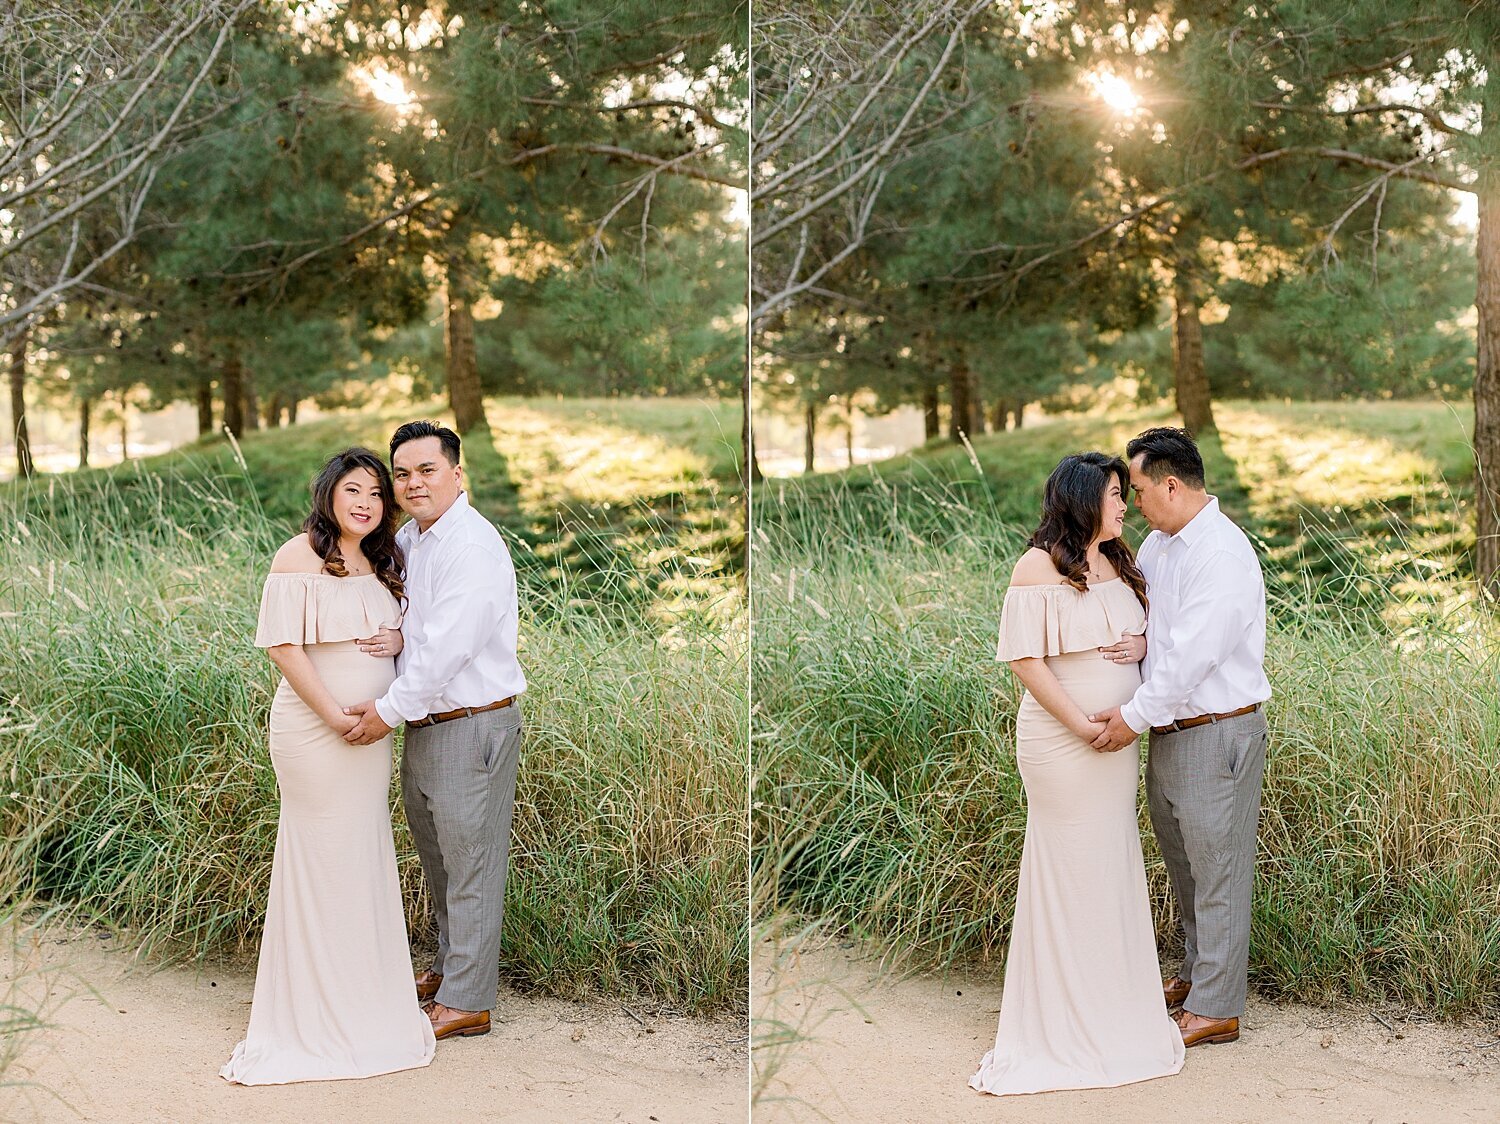 Couple takes maternity photos at Jeffrey Open Space Trail in Irvine, CA. Photos by Ambre Williams Photography.